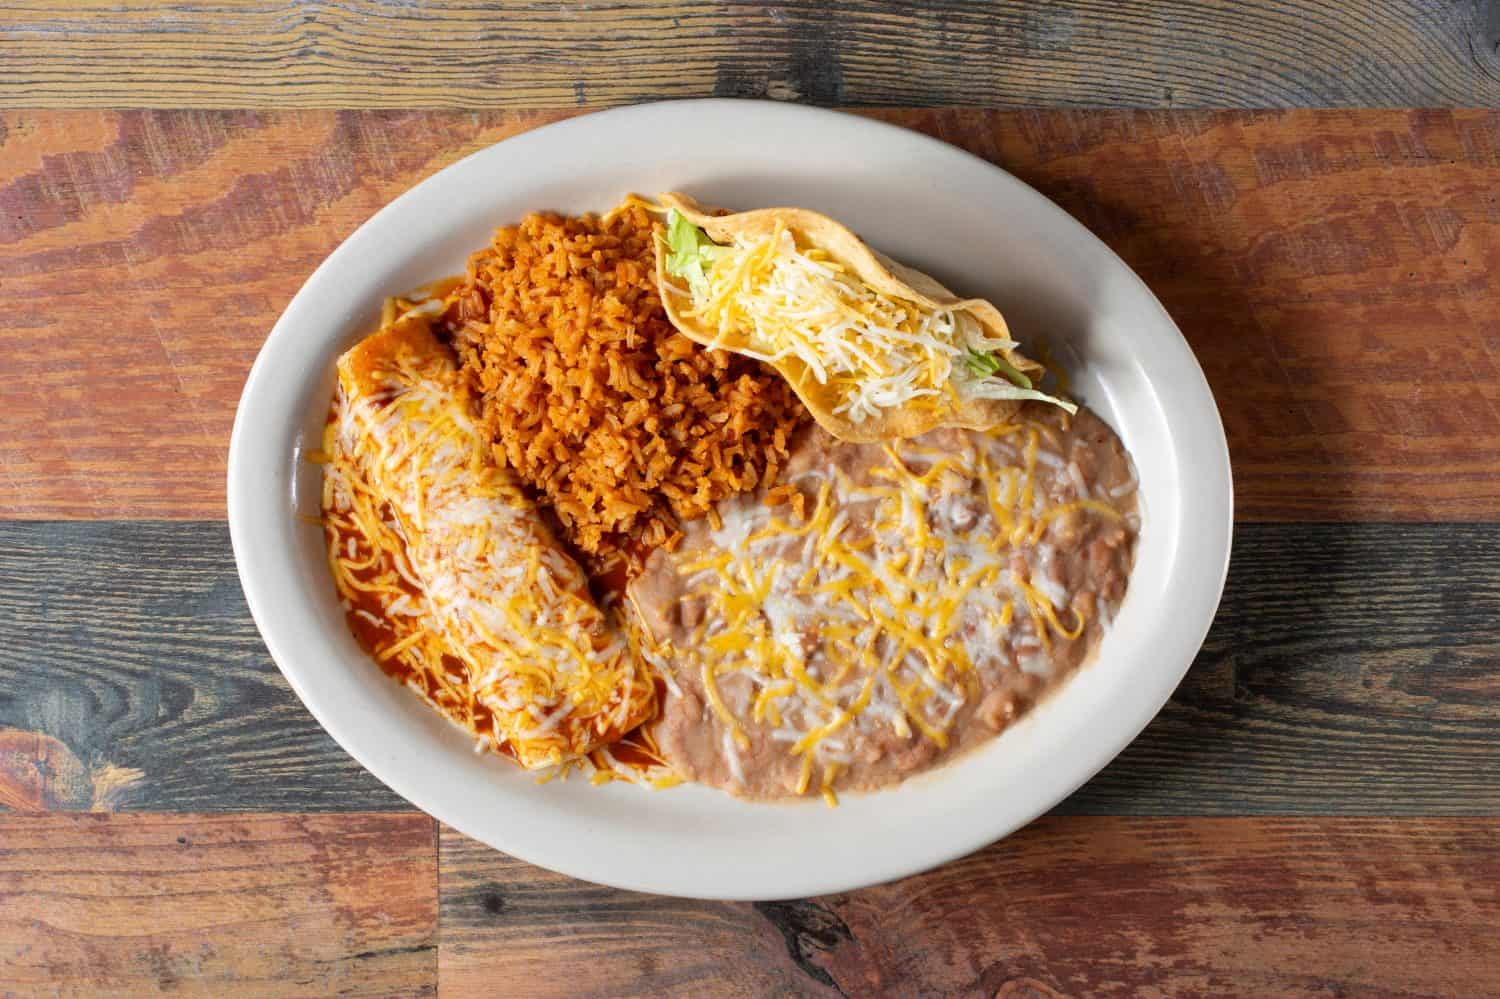 A top down view of a combo plate, featuring an enchilada, hard taco, rice and beans.